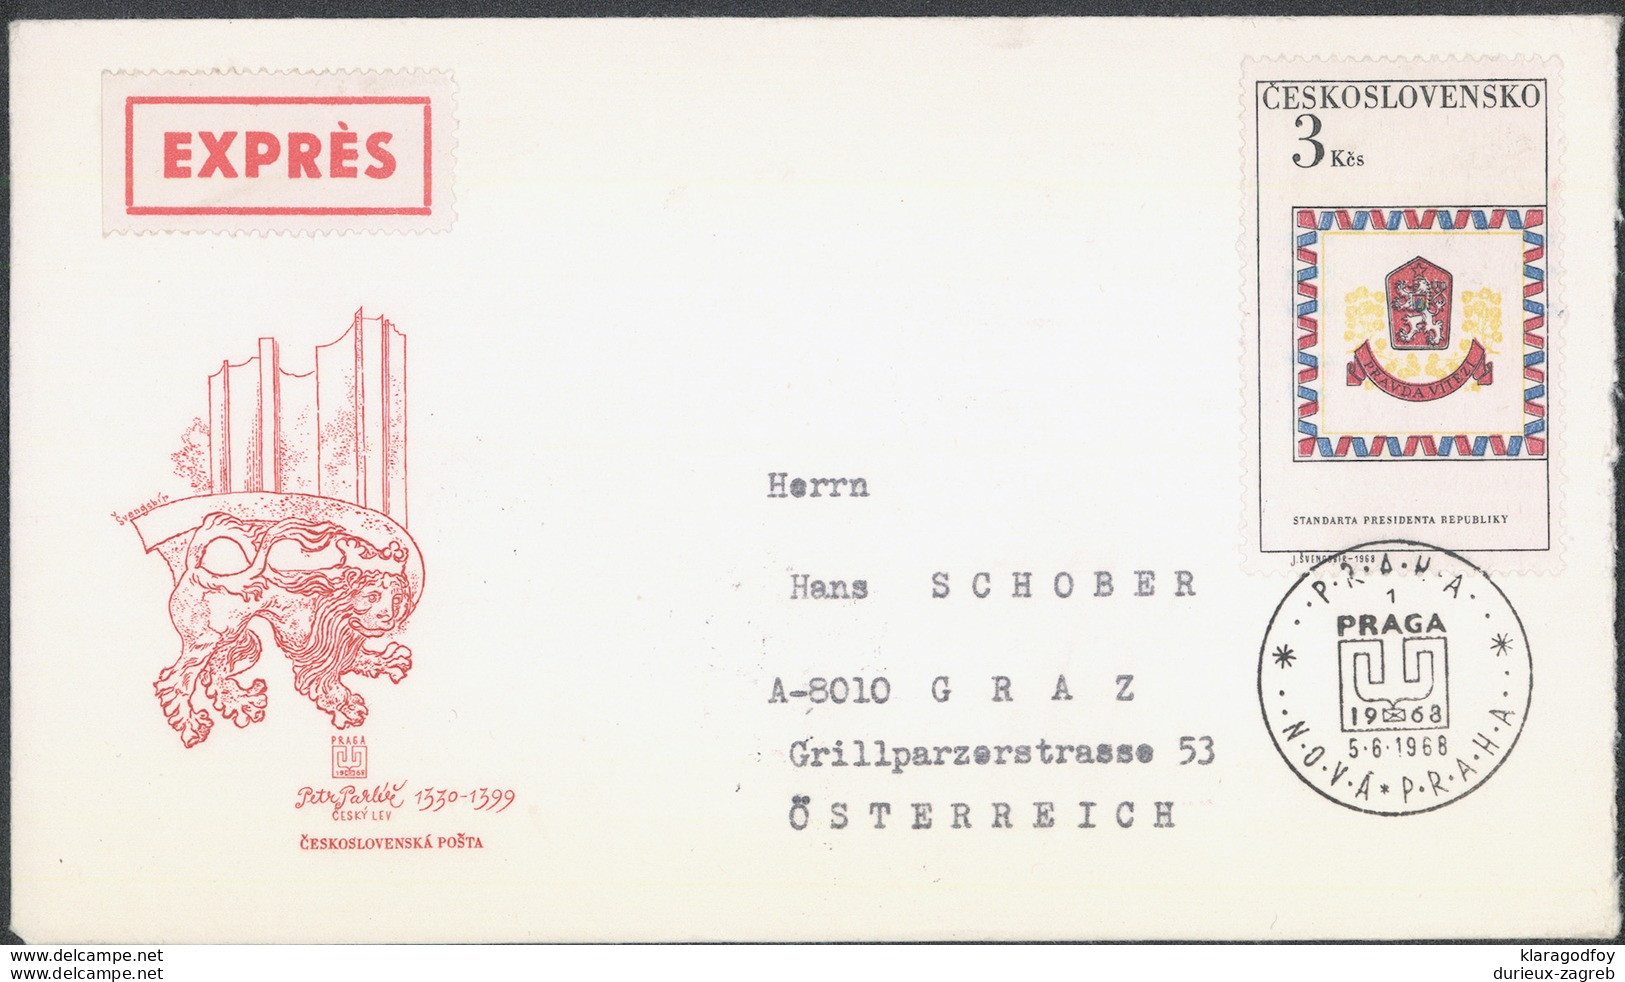 Czechoslovakia, Petr Parlé&#x159; Illustrated Letter Cover Express Travelled 1968 Karlovy Vary To Graz B170410 - Briefe U. Dokumente